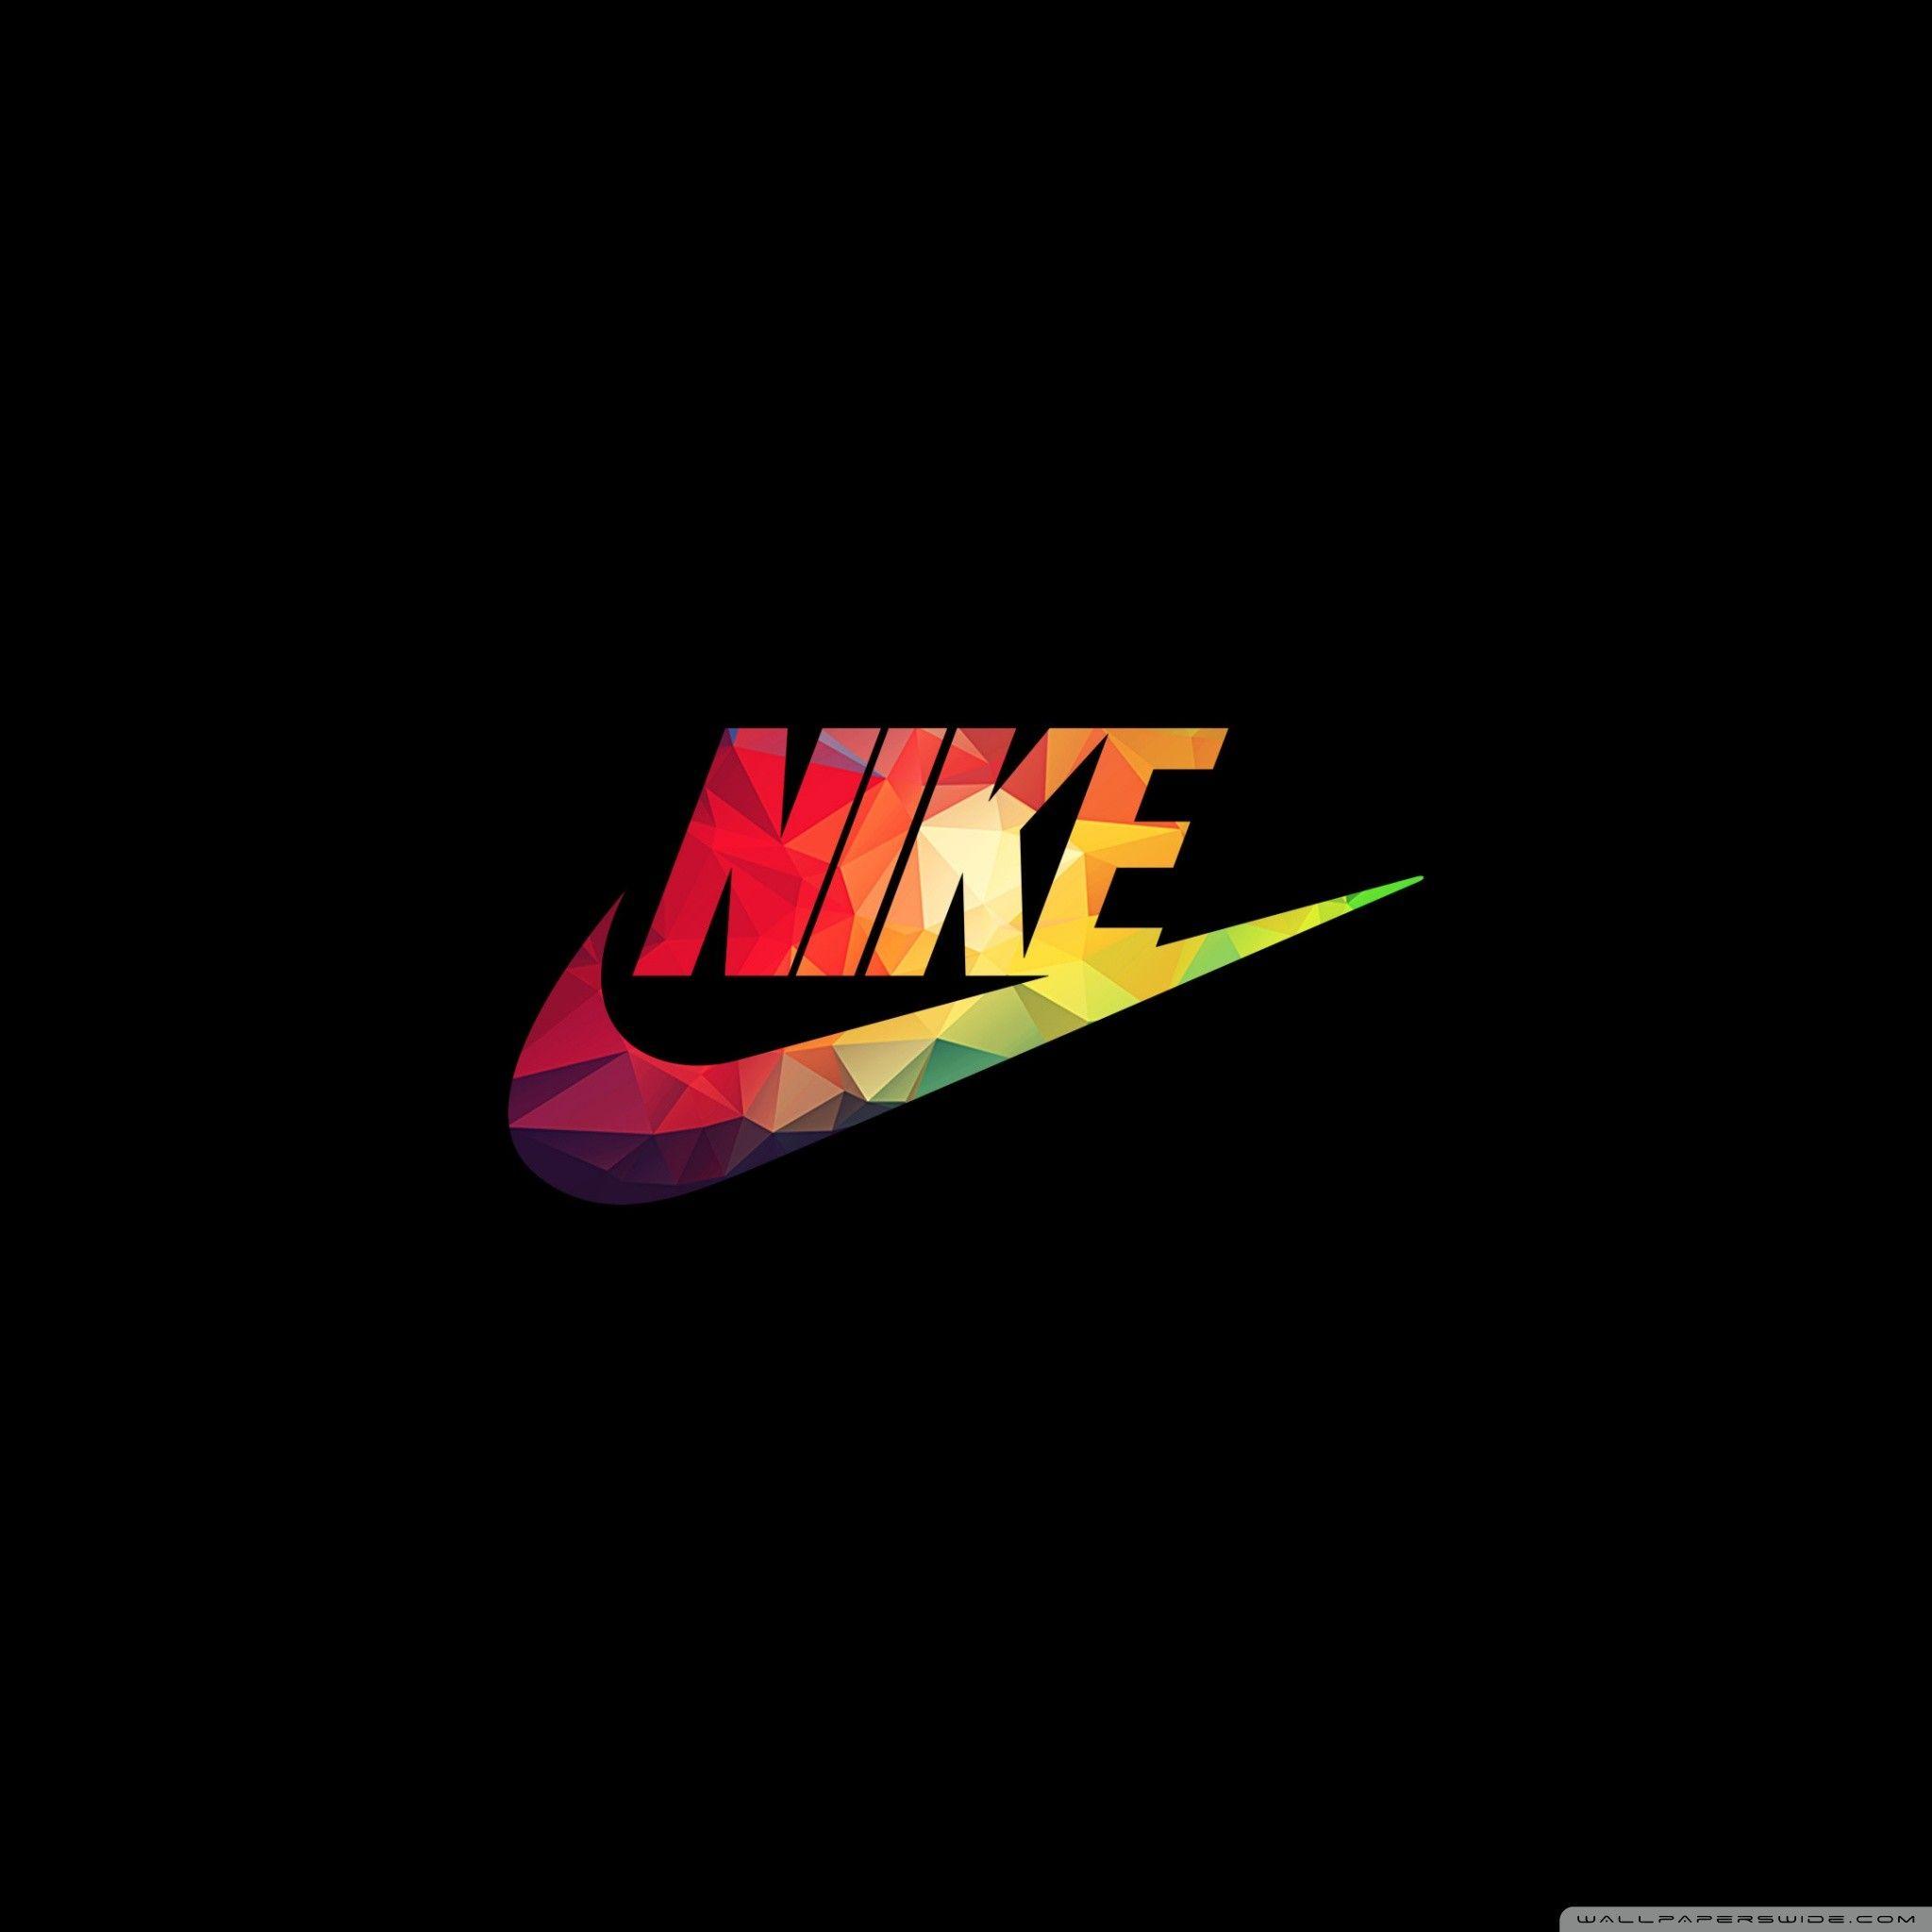 Nike Iphone 5 Wallpapers Top Free Nike Iphone 5 Backgrounds Wallpaperaccess